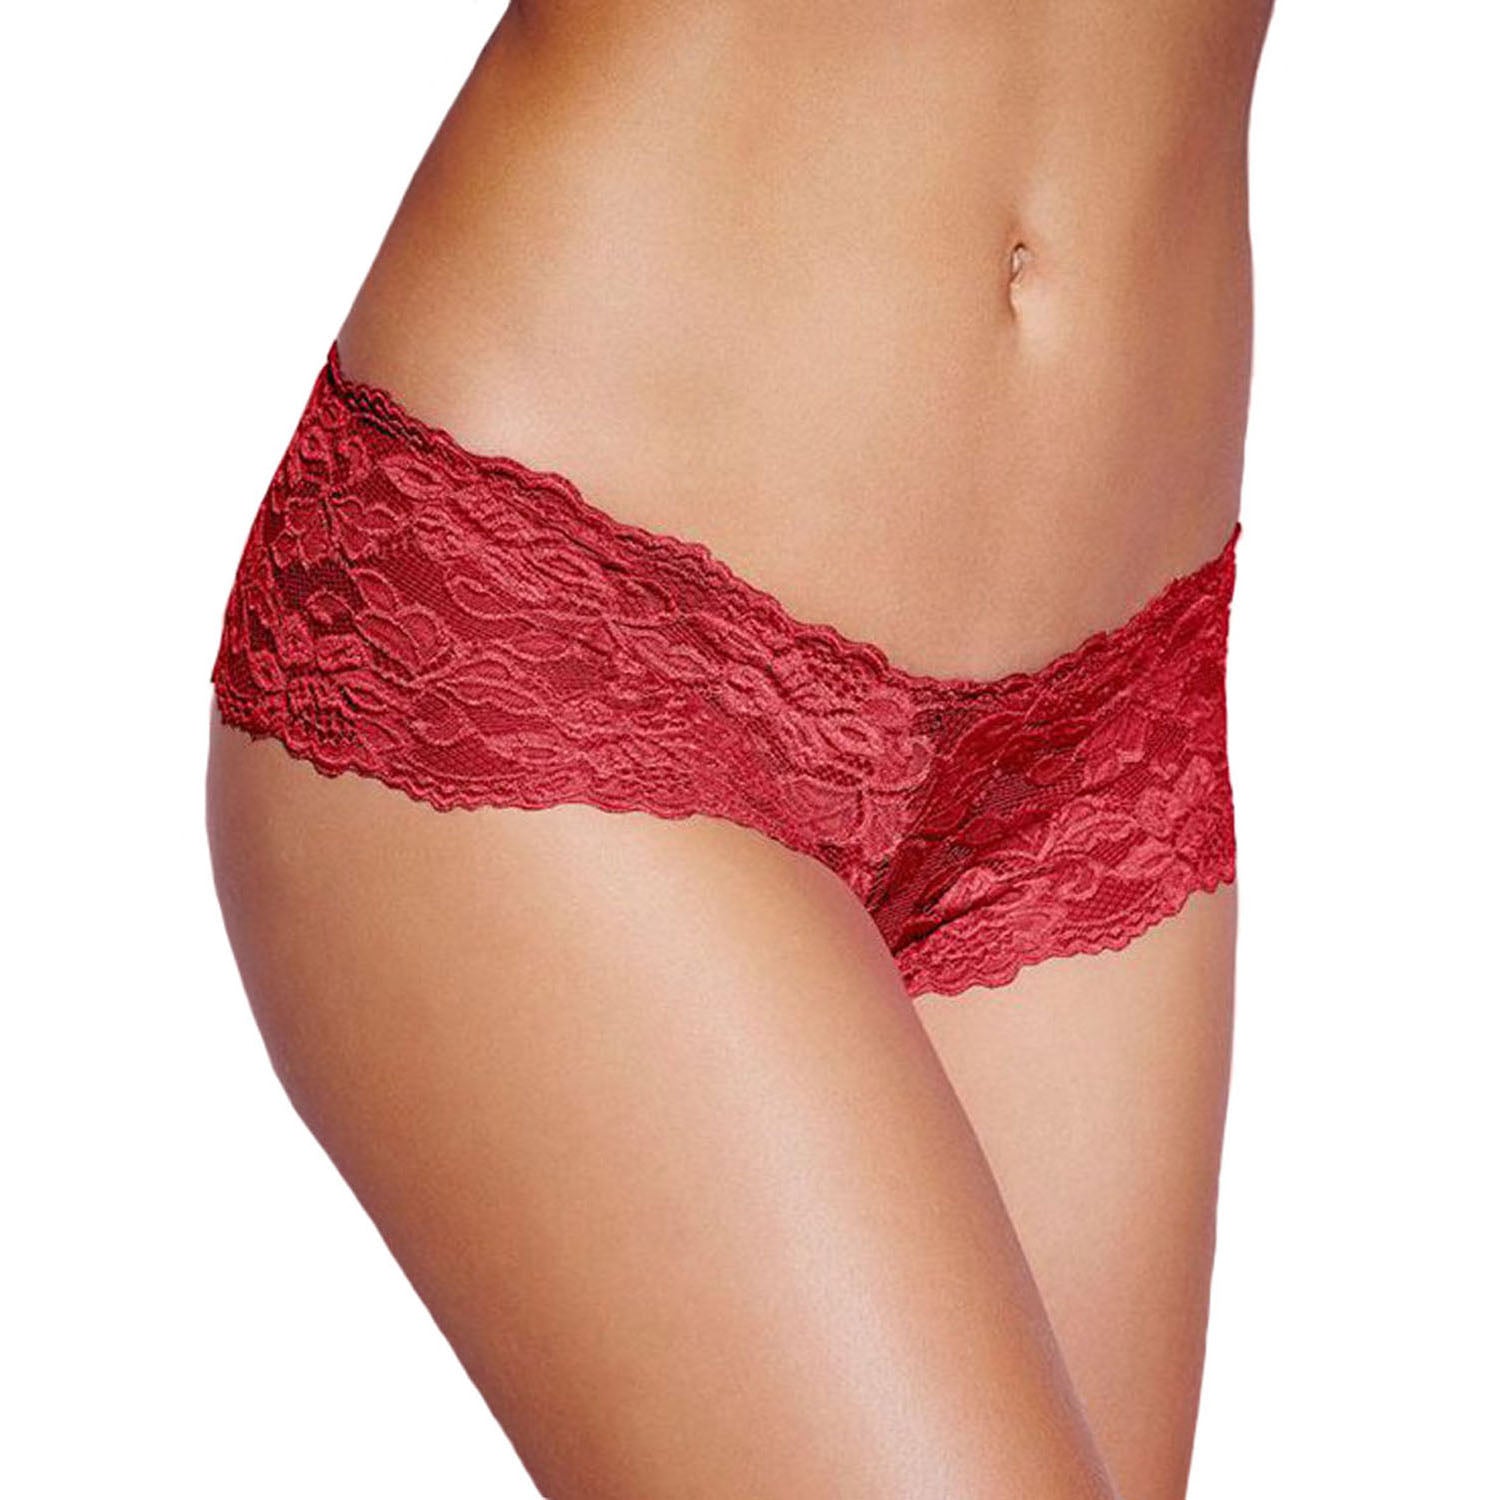 Floral Lace Scalloped French Knickers - Burgundy Red